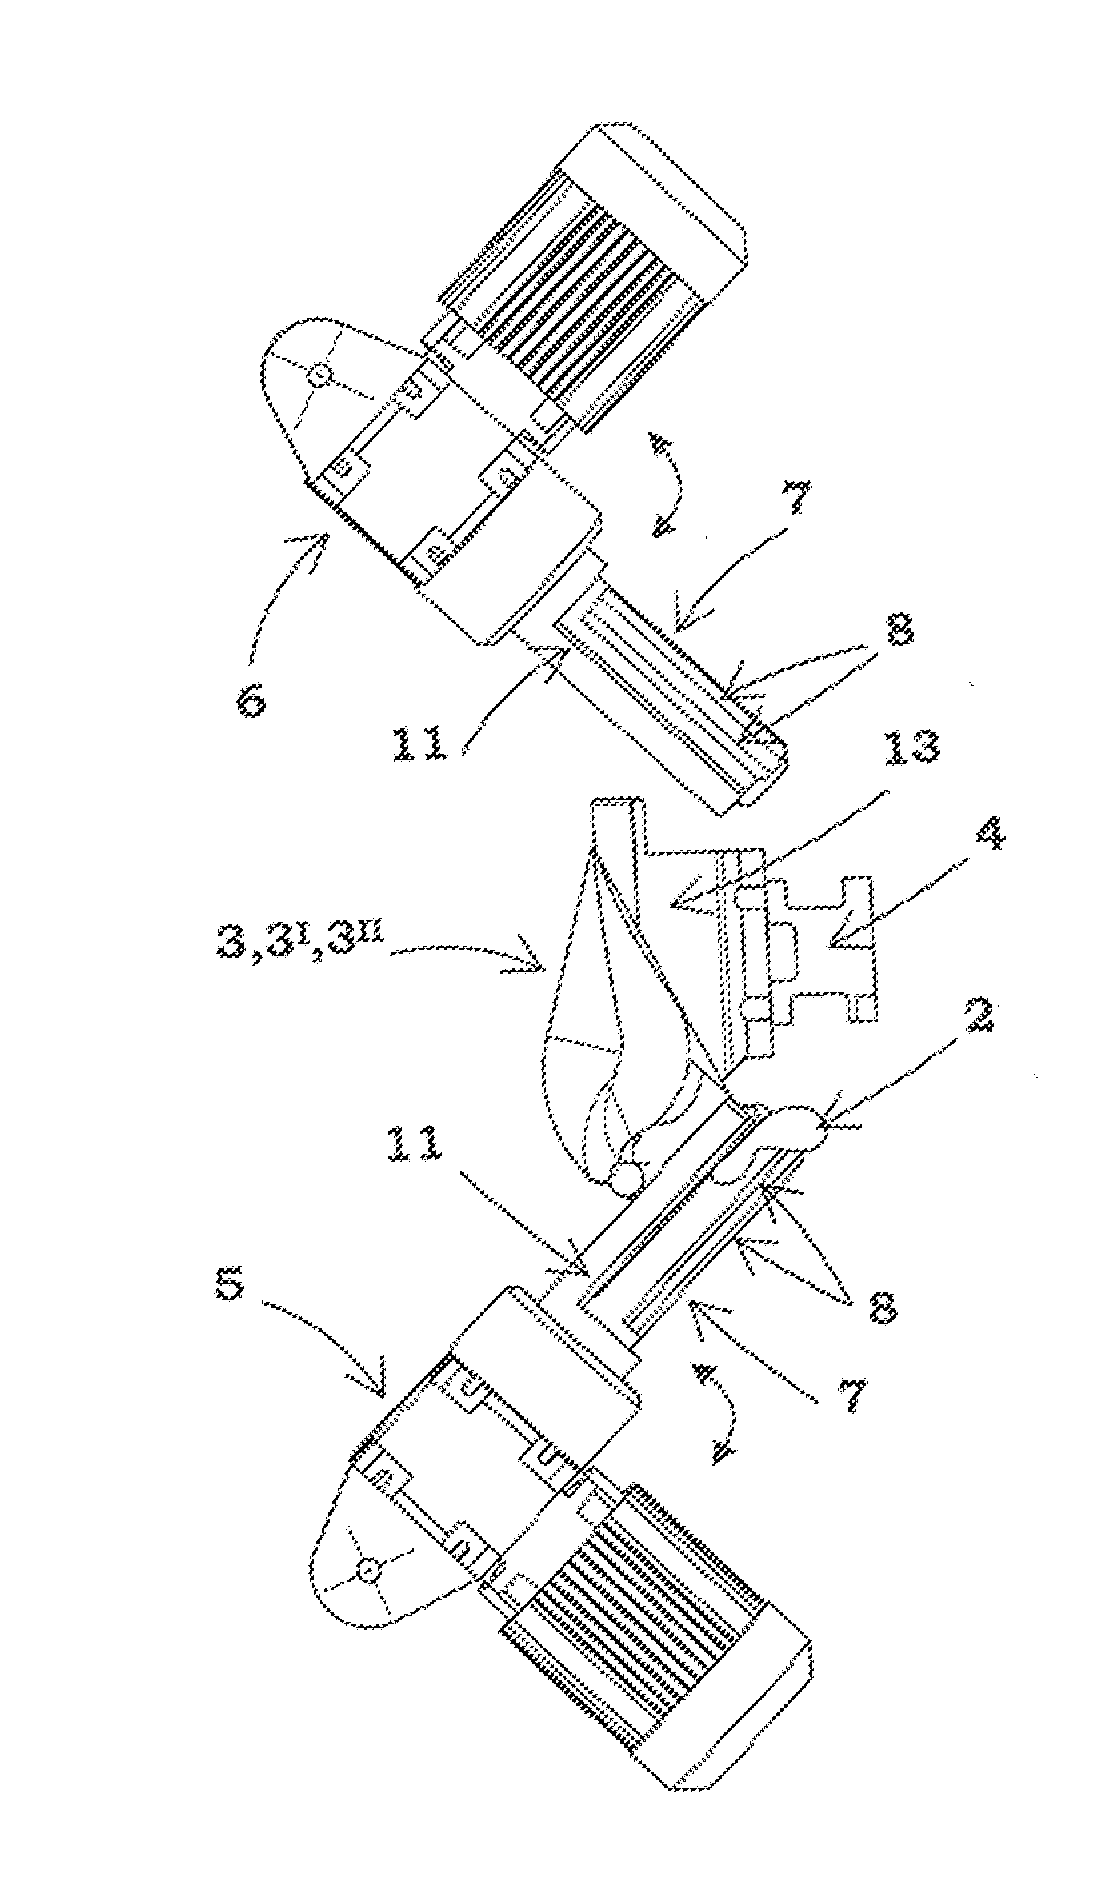 Poultry processing device and method for poultry processing